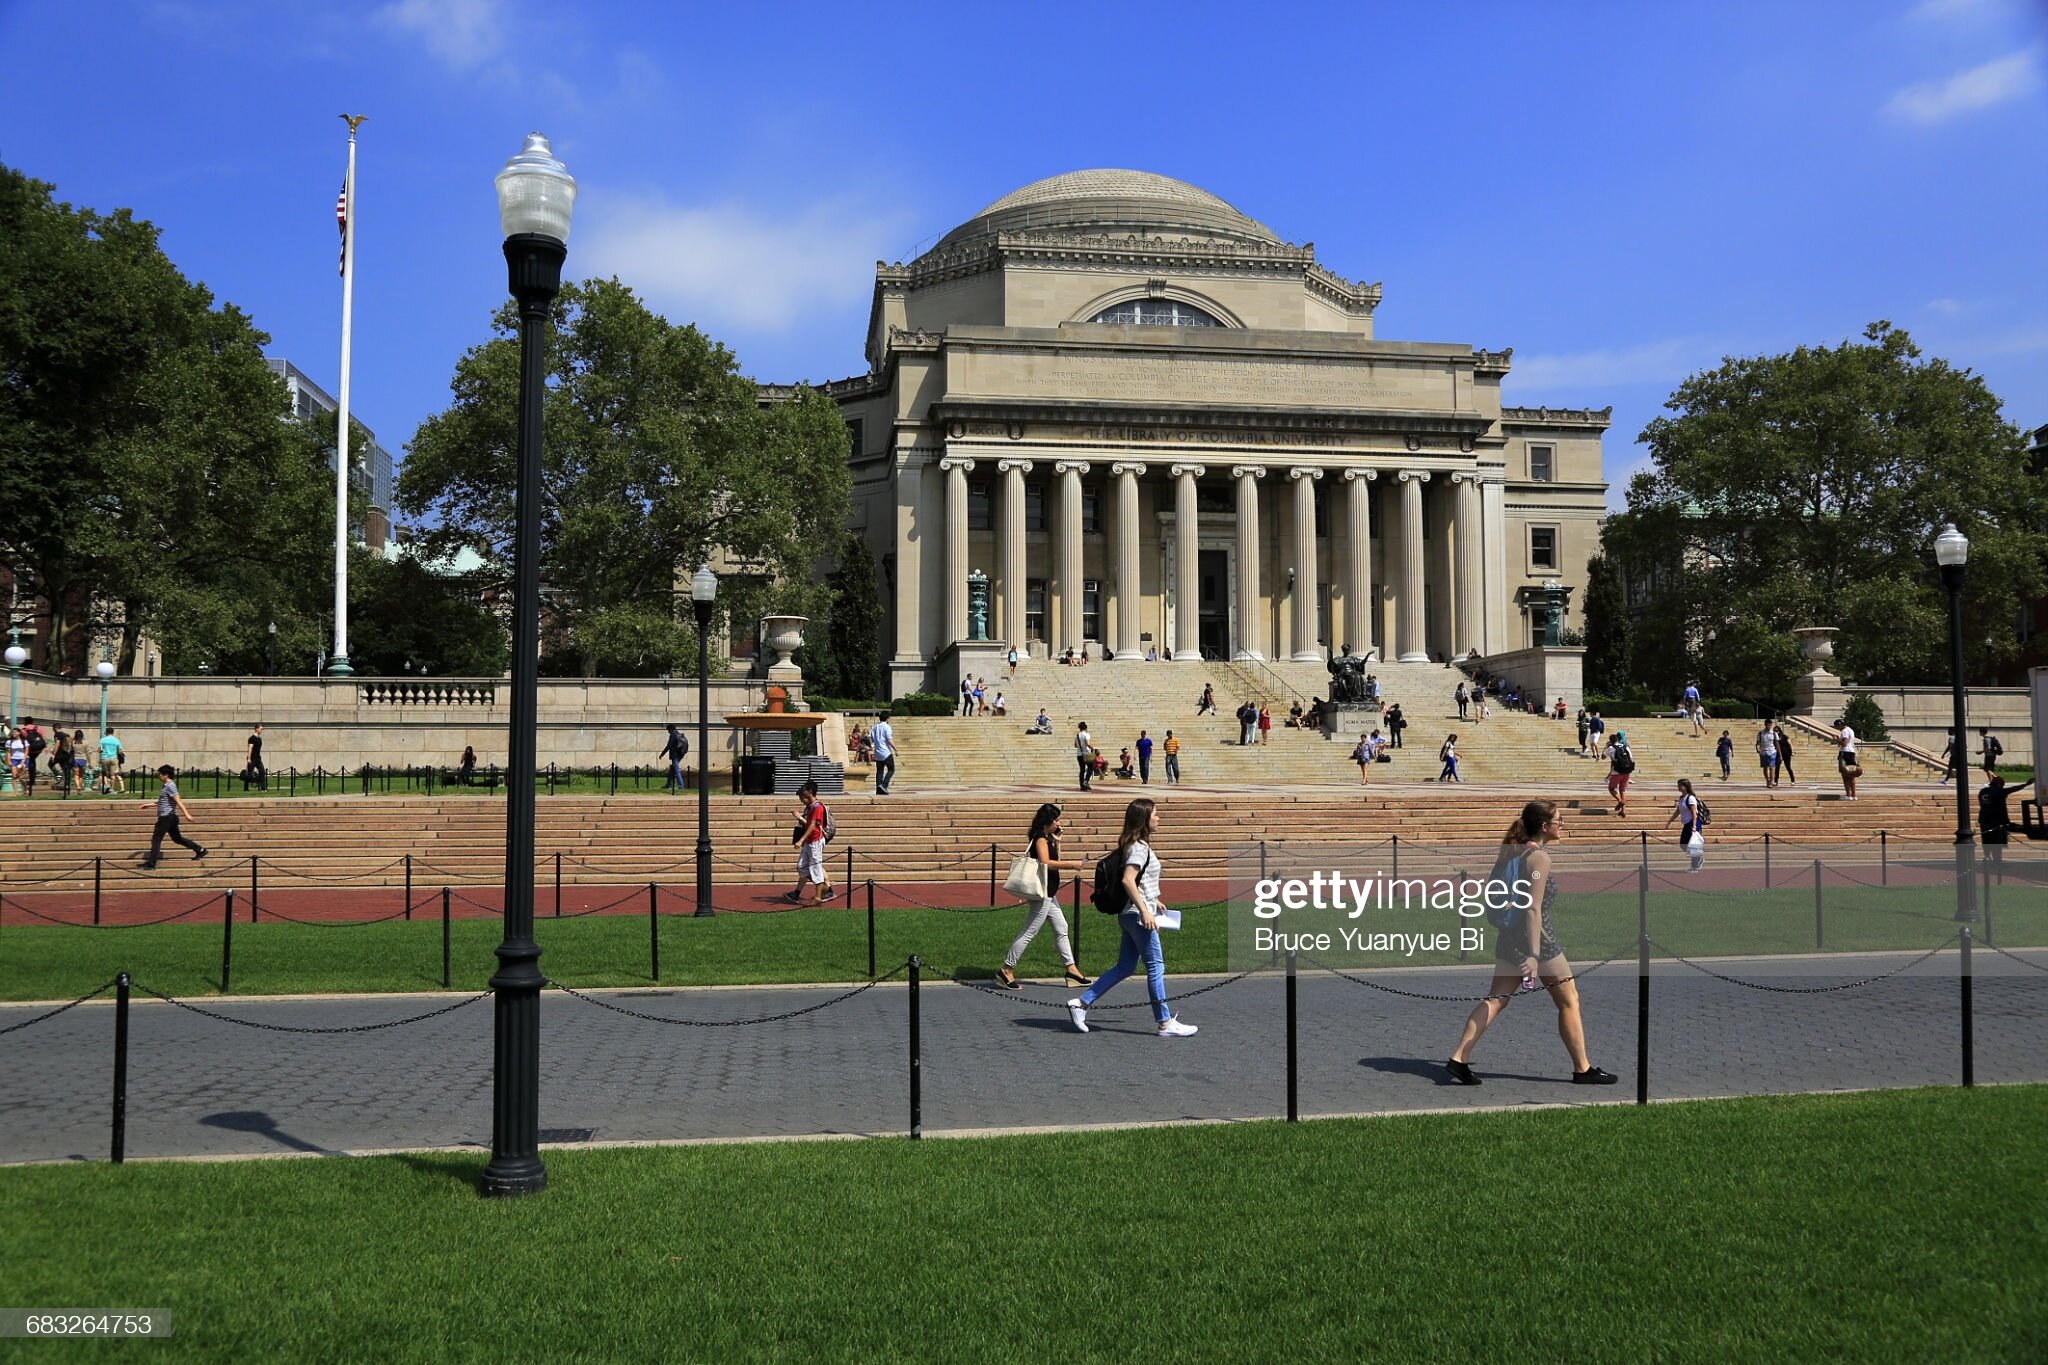 Picture of Columbia University’s campus taken by Bruce Yuanyue Bi - Getty Images